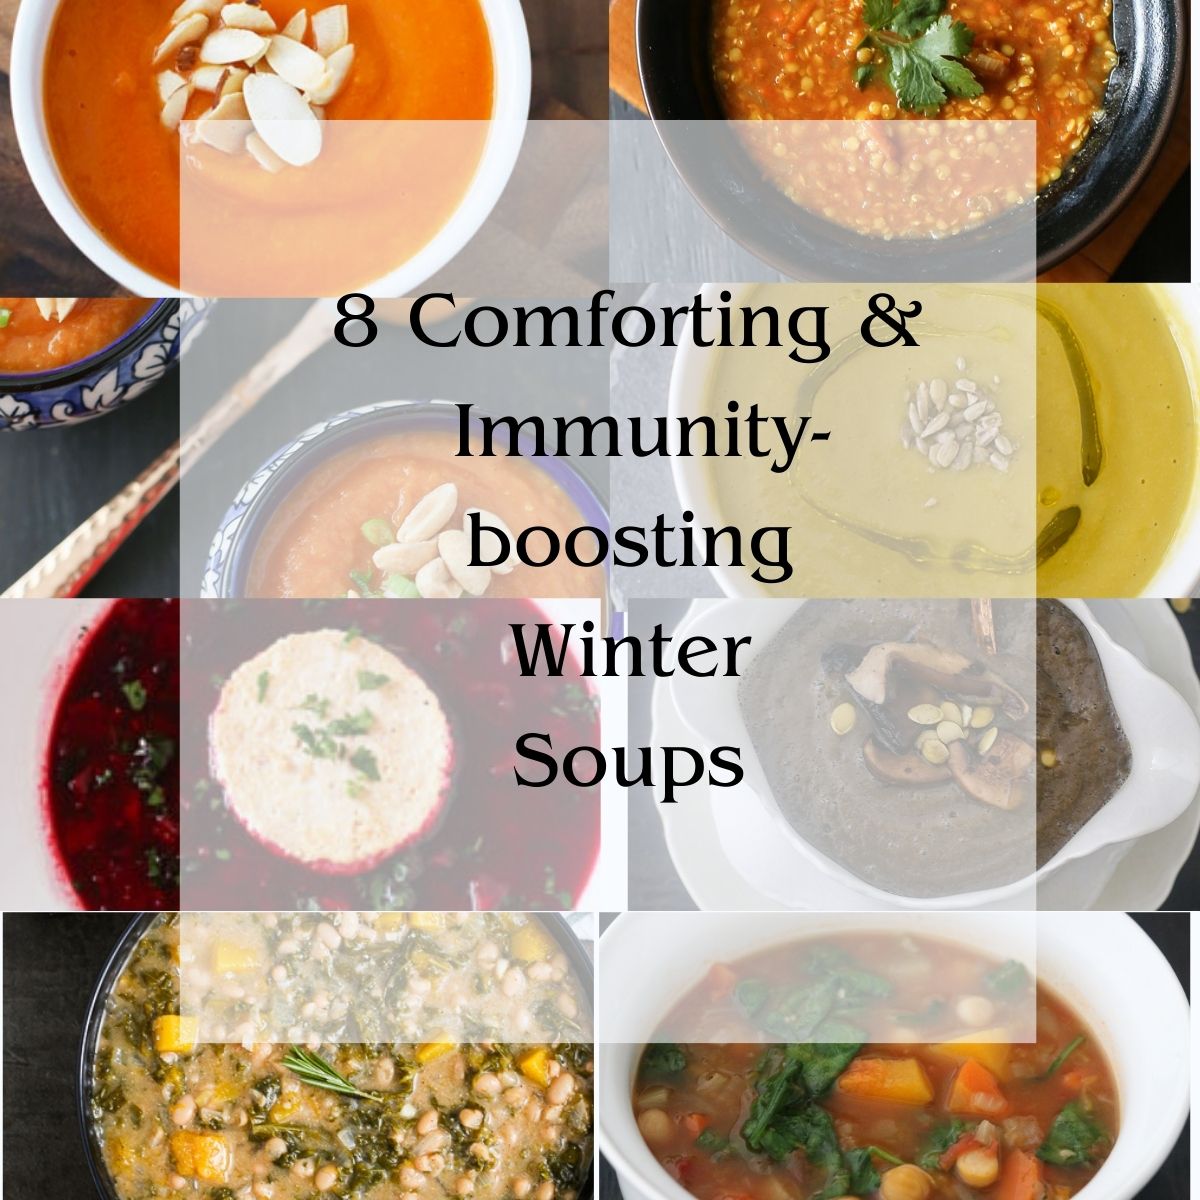 8 Comforting and Immunity-boosting Winter Soups